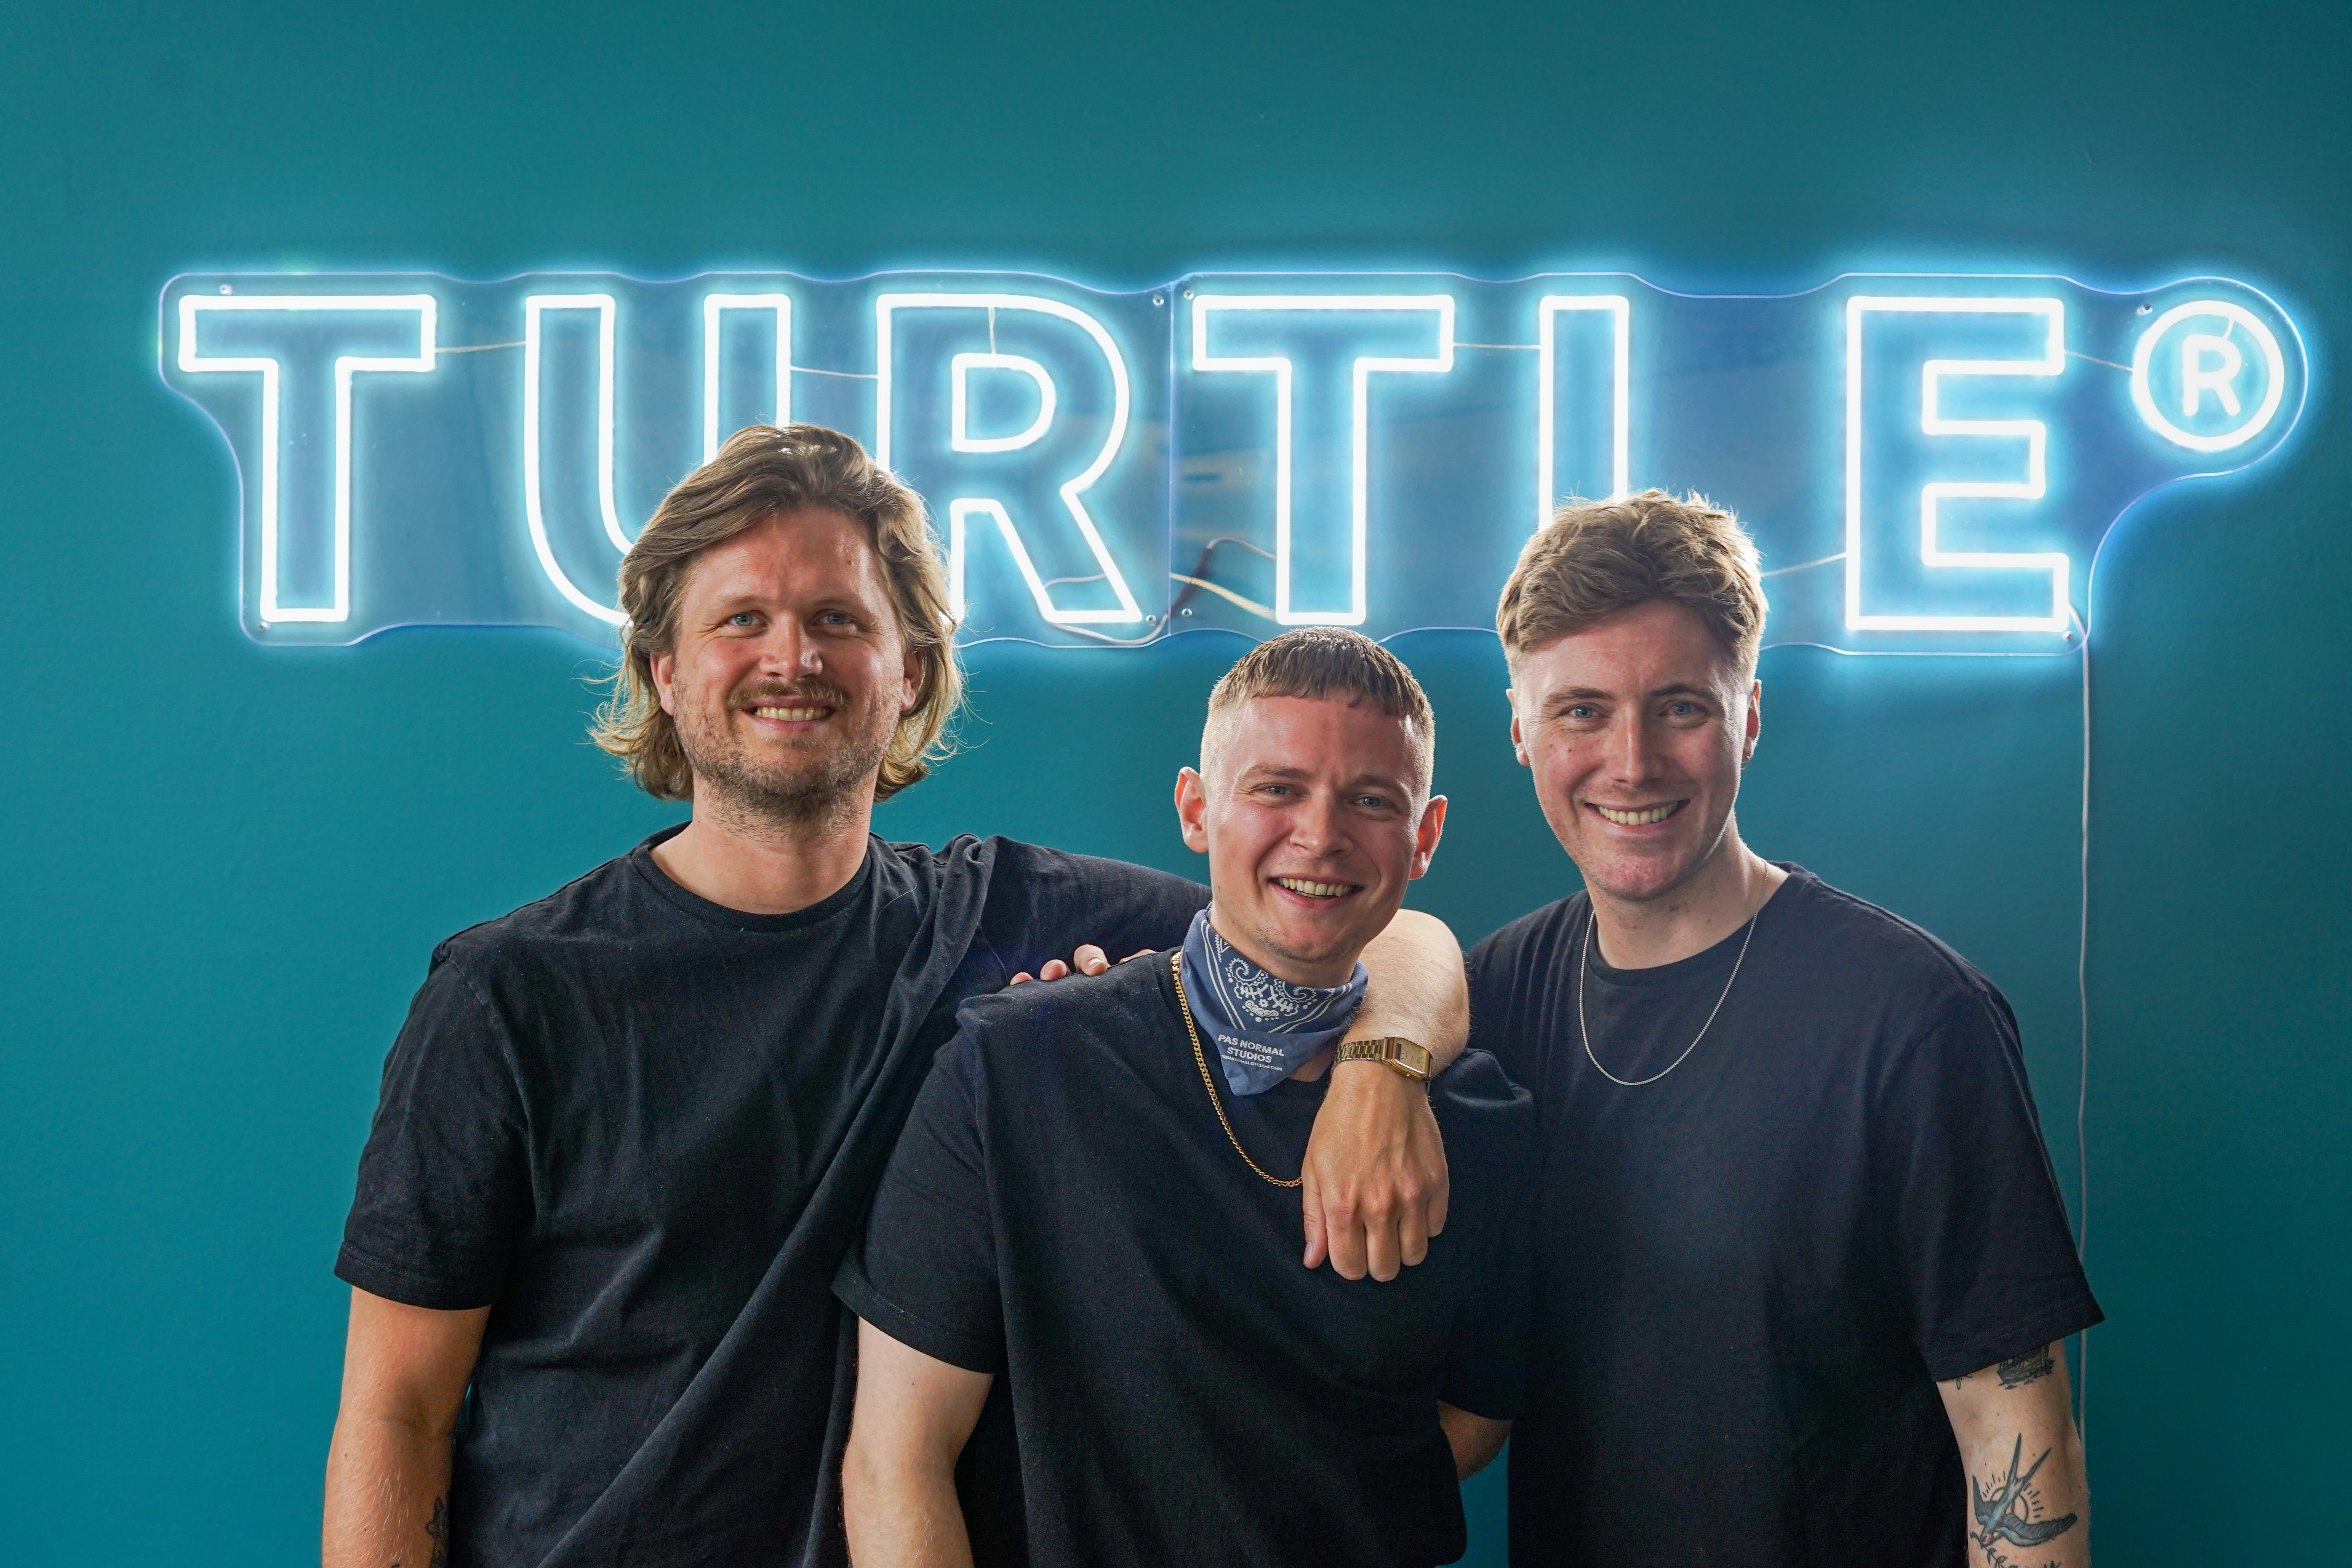 The founders of Turtle (from left Jesper, Esben, and Mads)